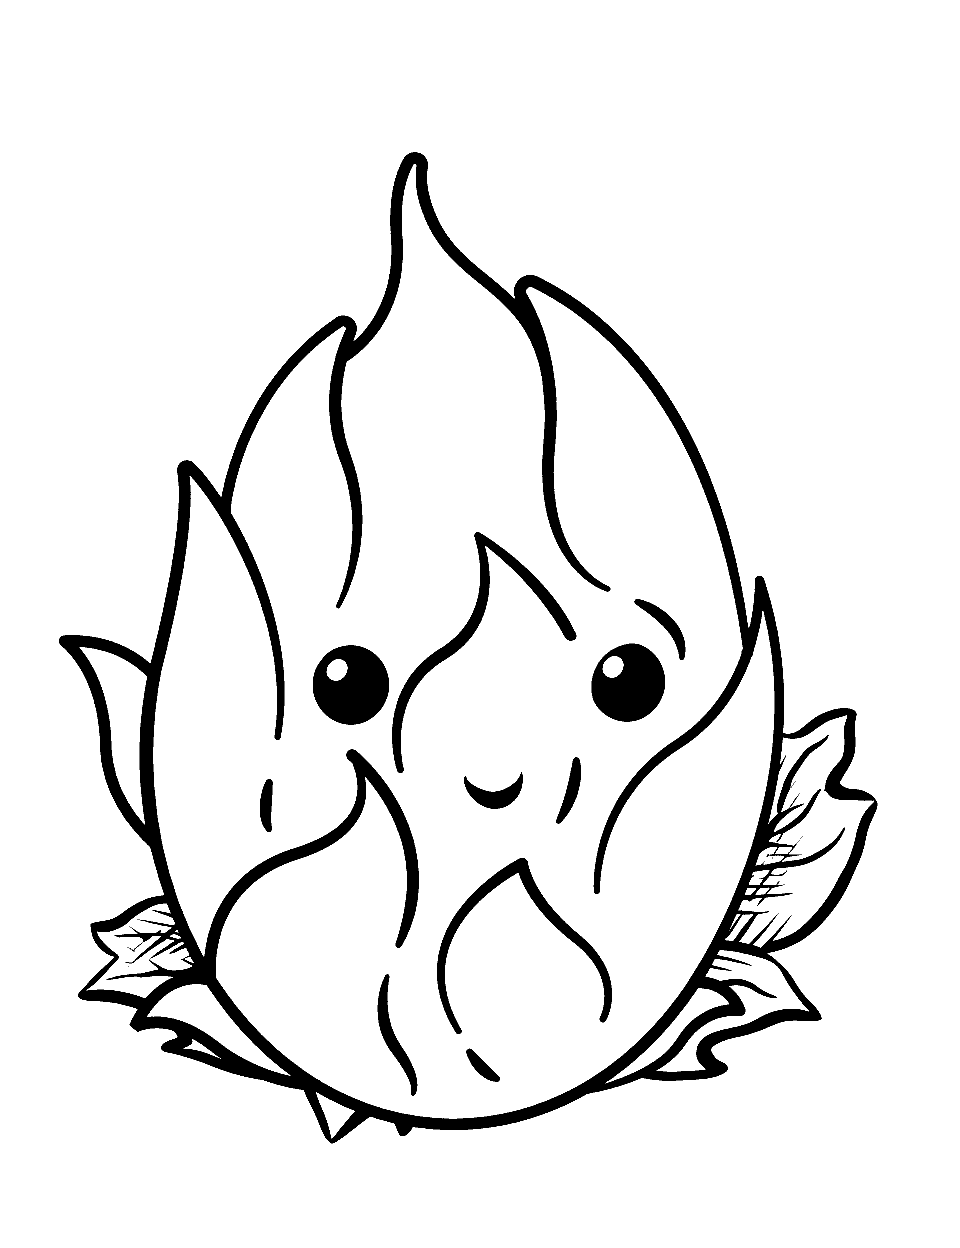 Dragon Fruit Face Coloring Page - A dragon fruit with a face on it.